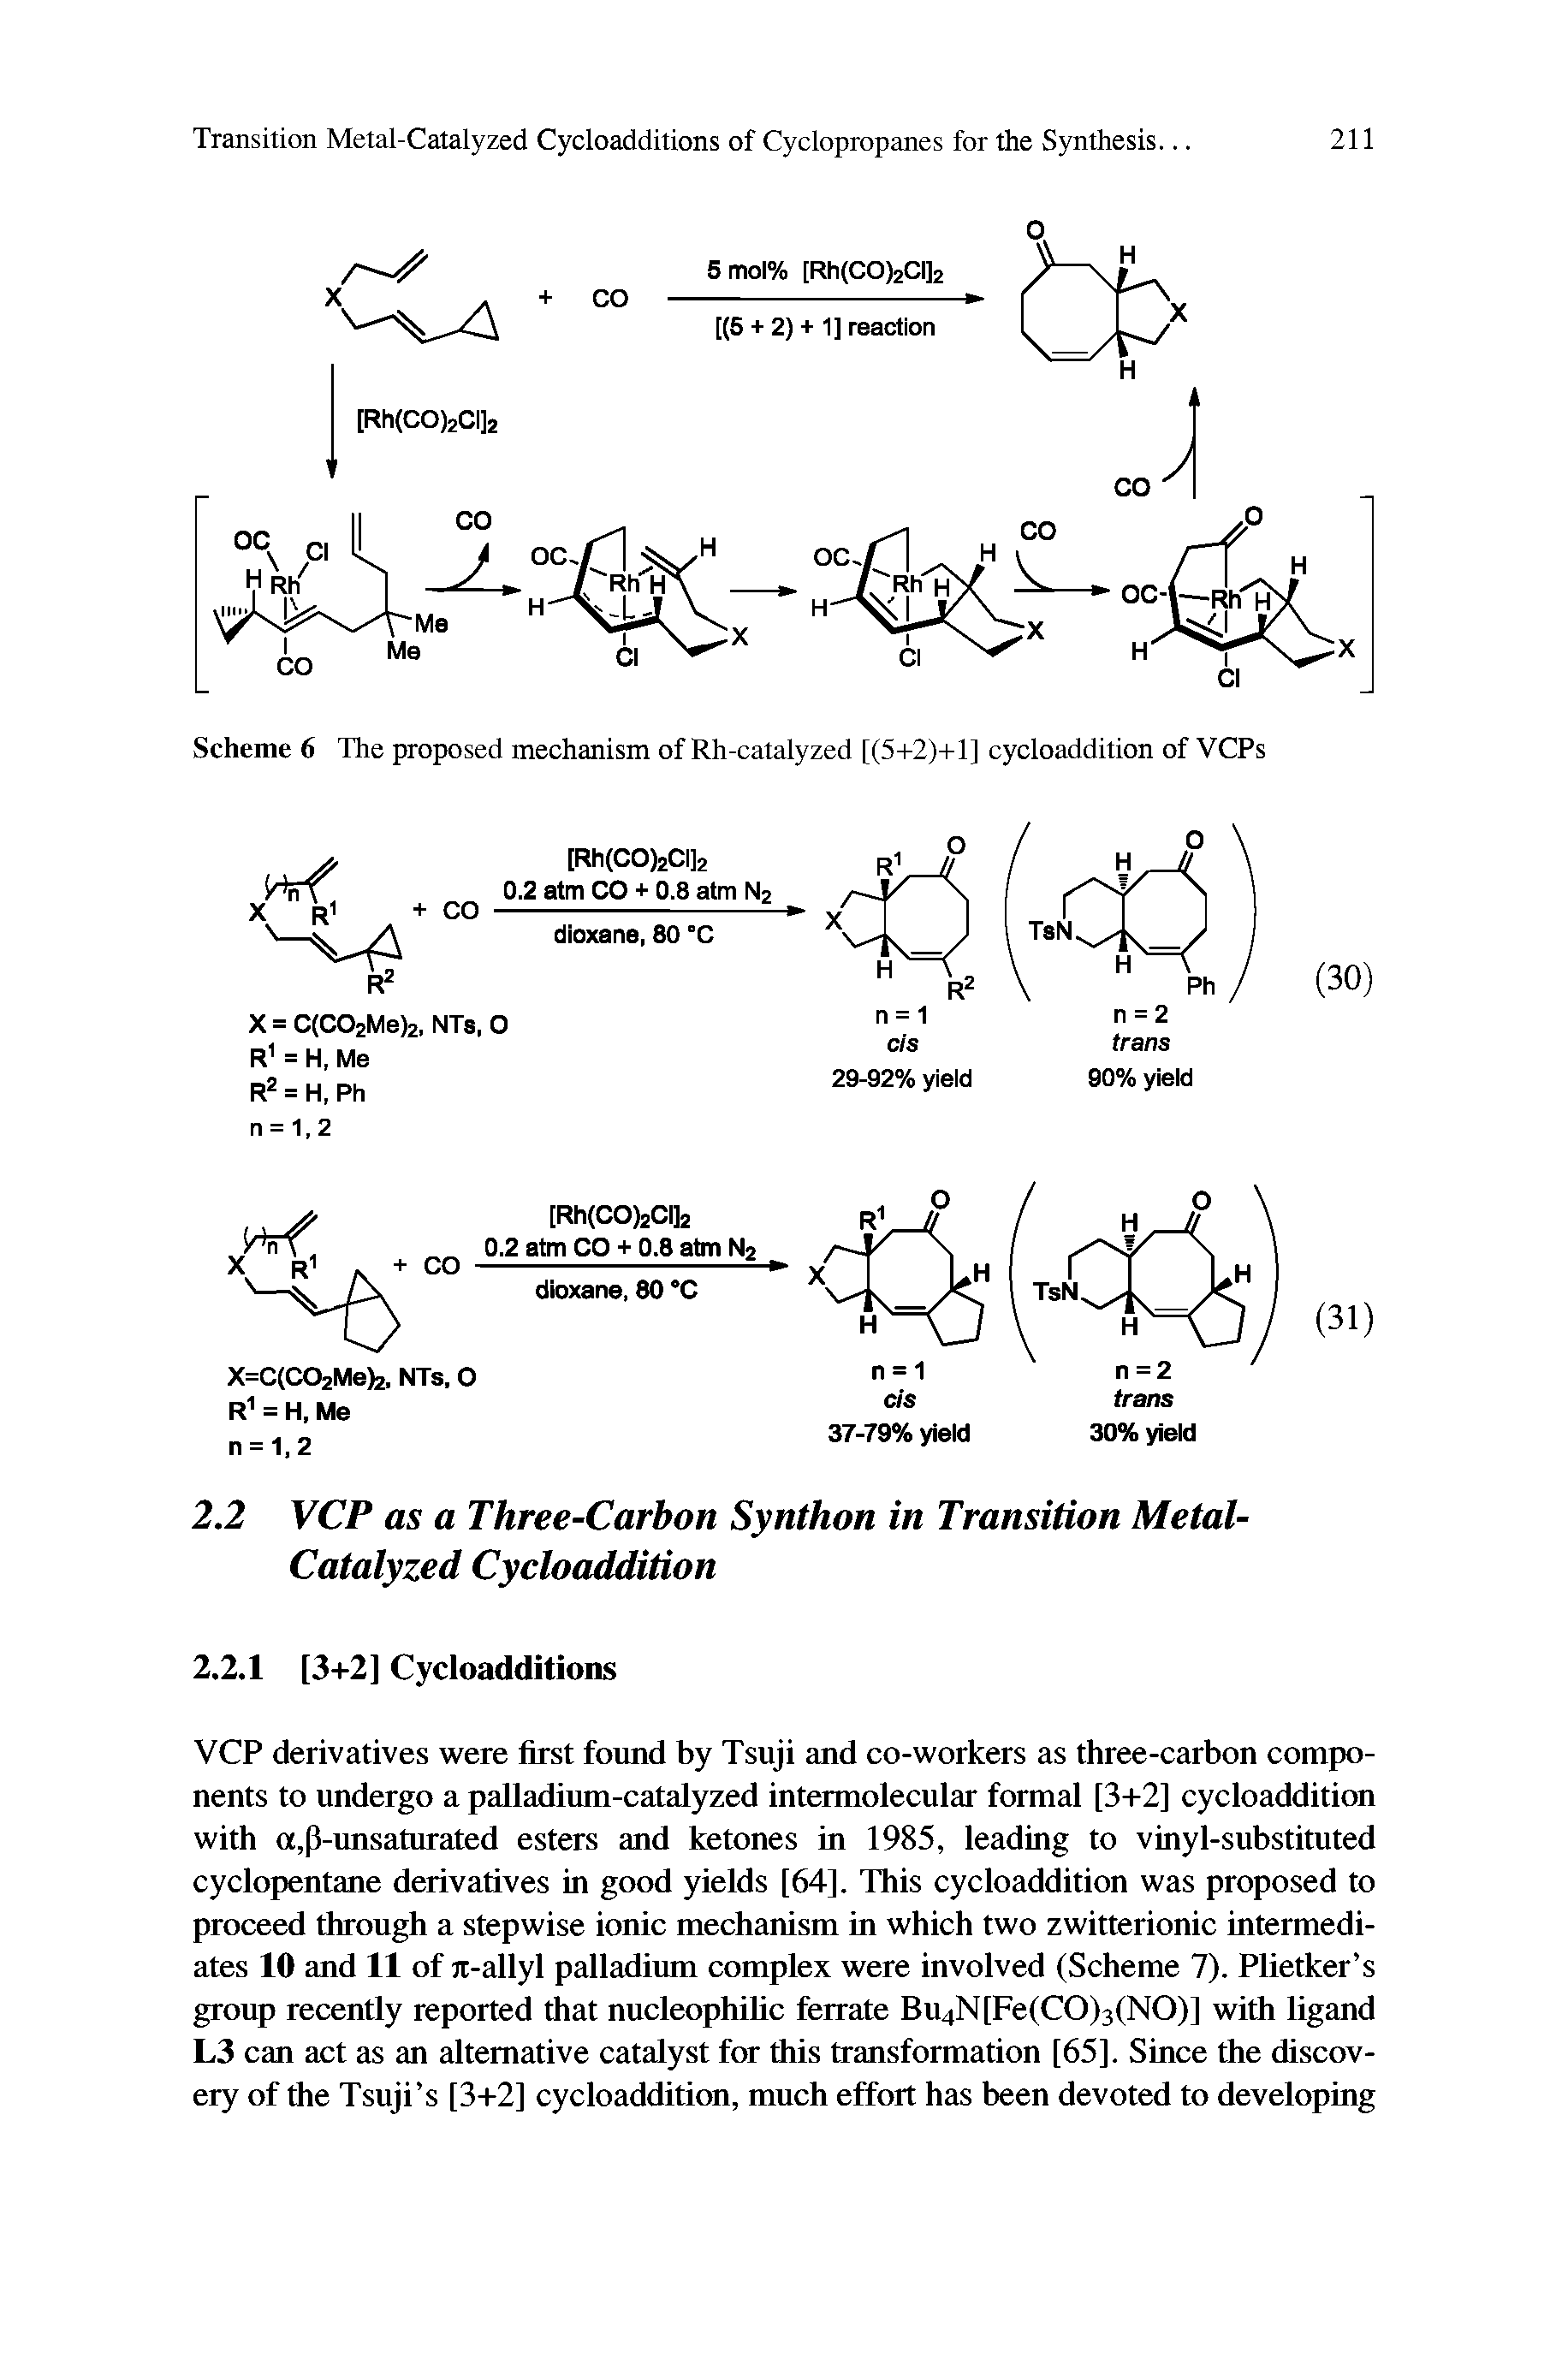 Scheme 6 The proposed mechanism of Rh-catalyzed [(5+2)+l] cycloaddition of VCPs...